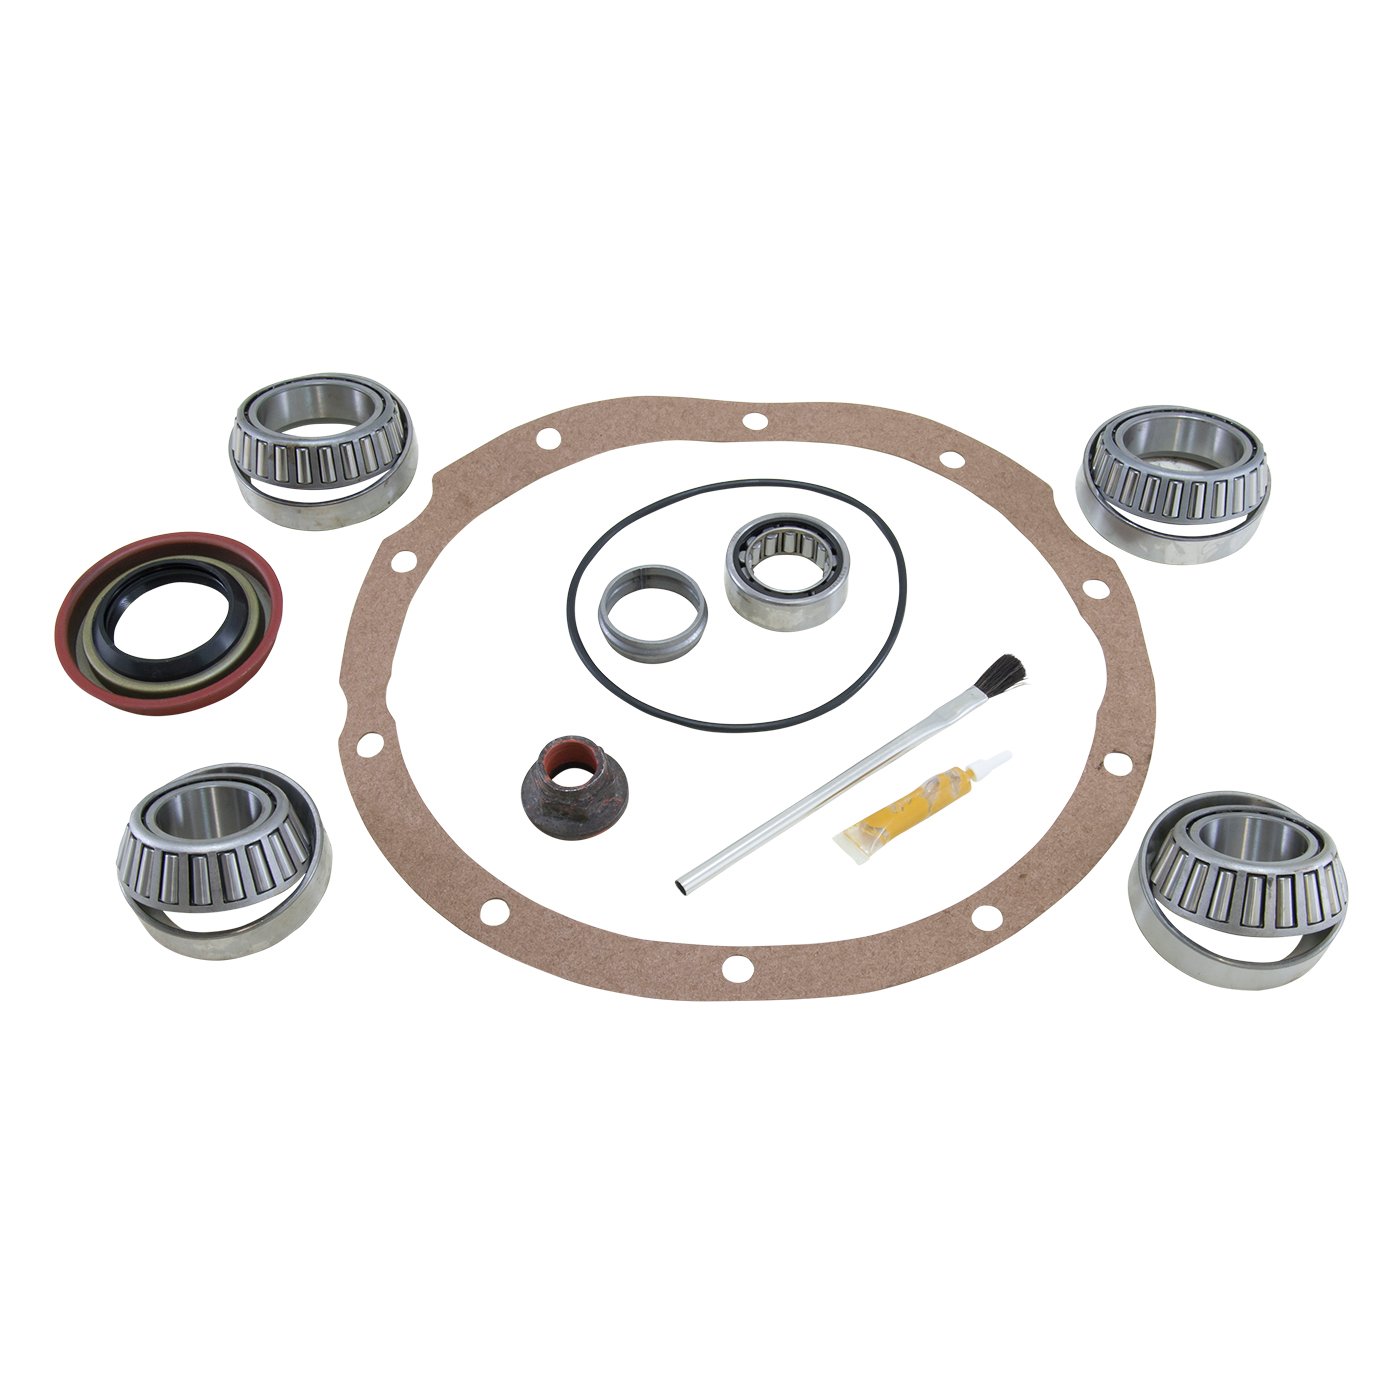 USA Standard ZBKF9A Bearing Kit, For Ford 9 in., Lm102949 Carrier Bearings